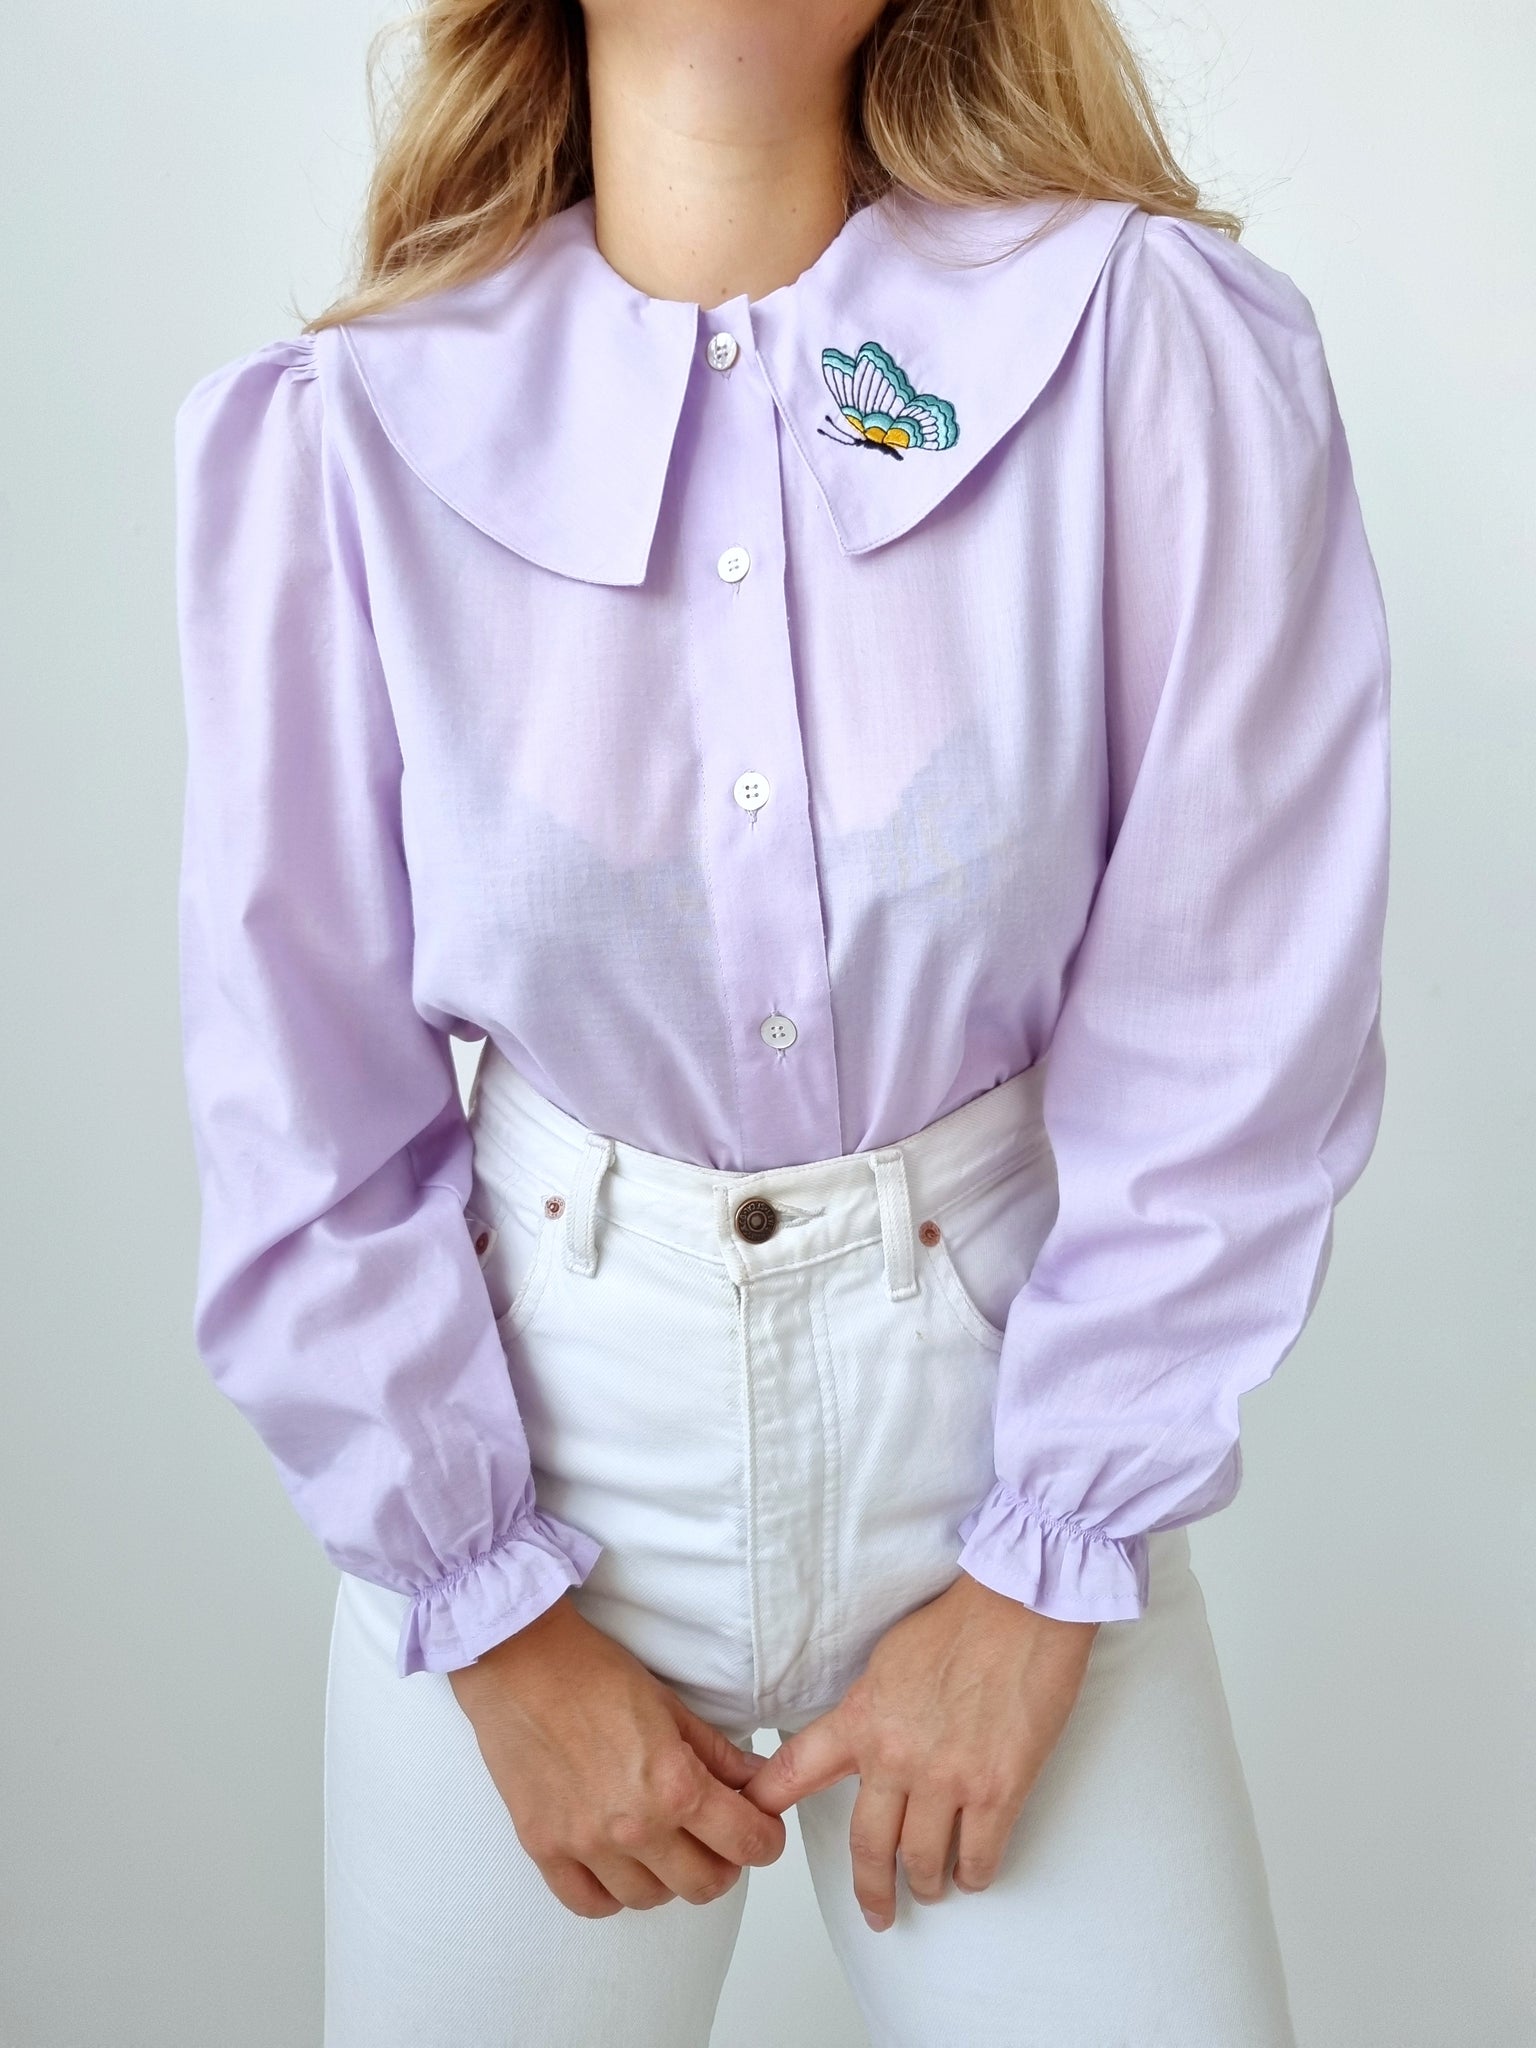 Vintage Handmade Lilac Butterfly Blouse